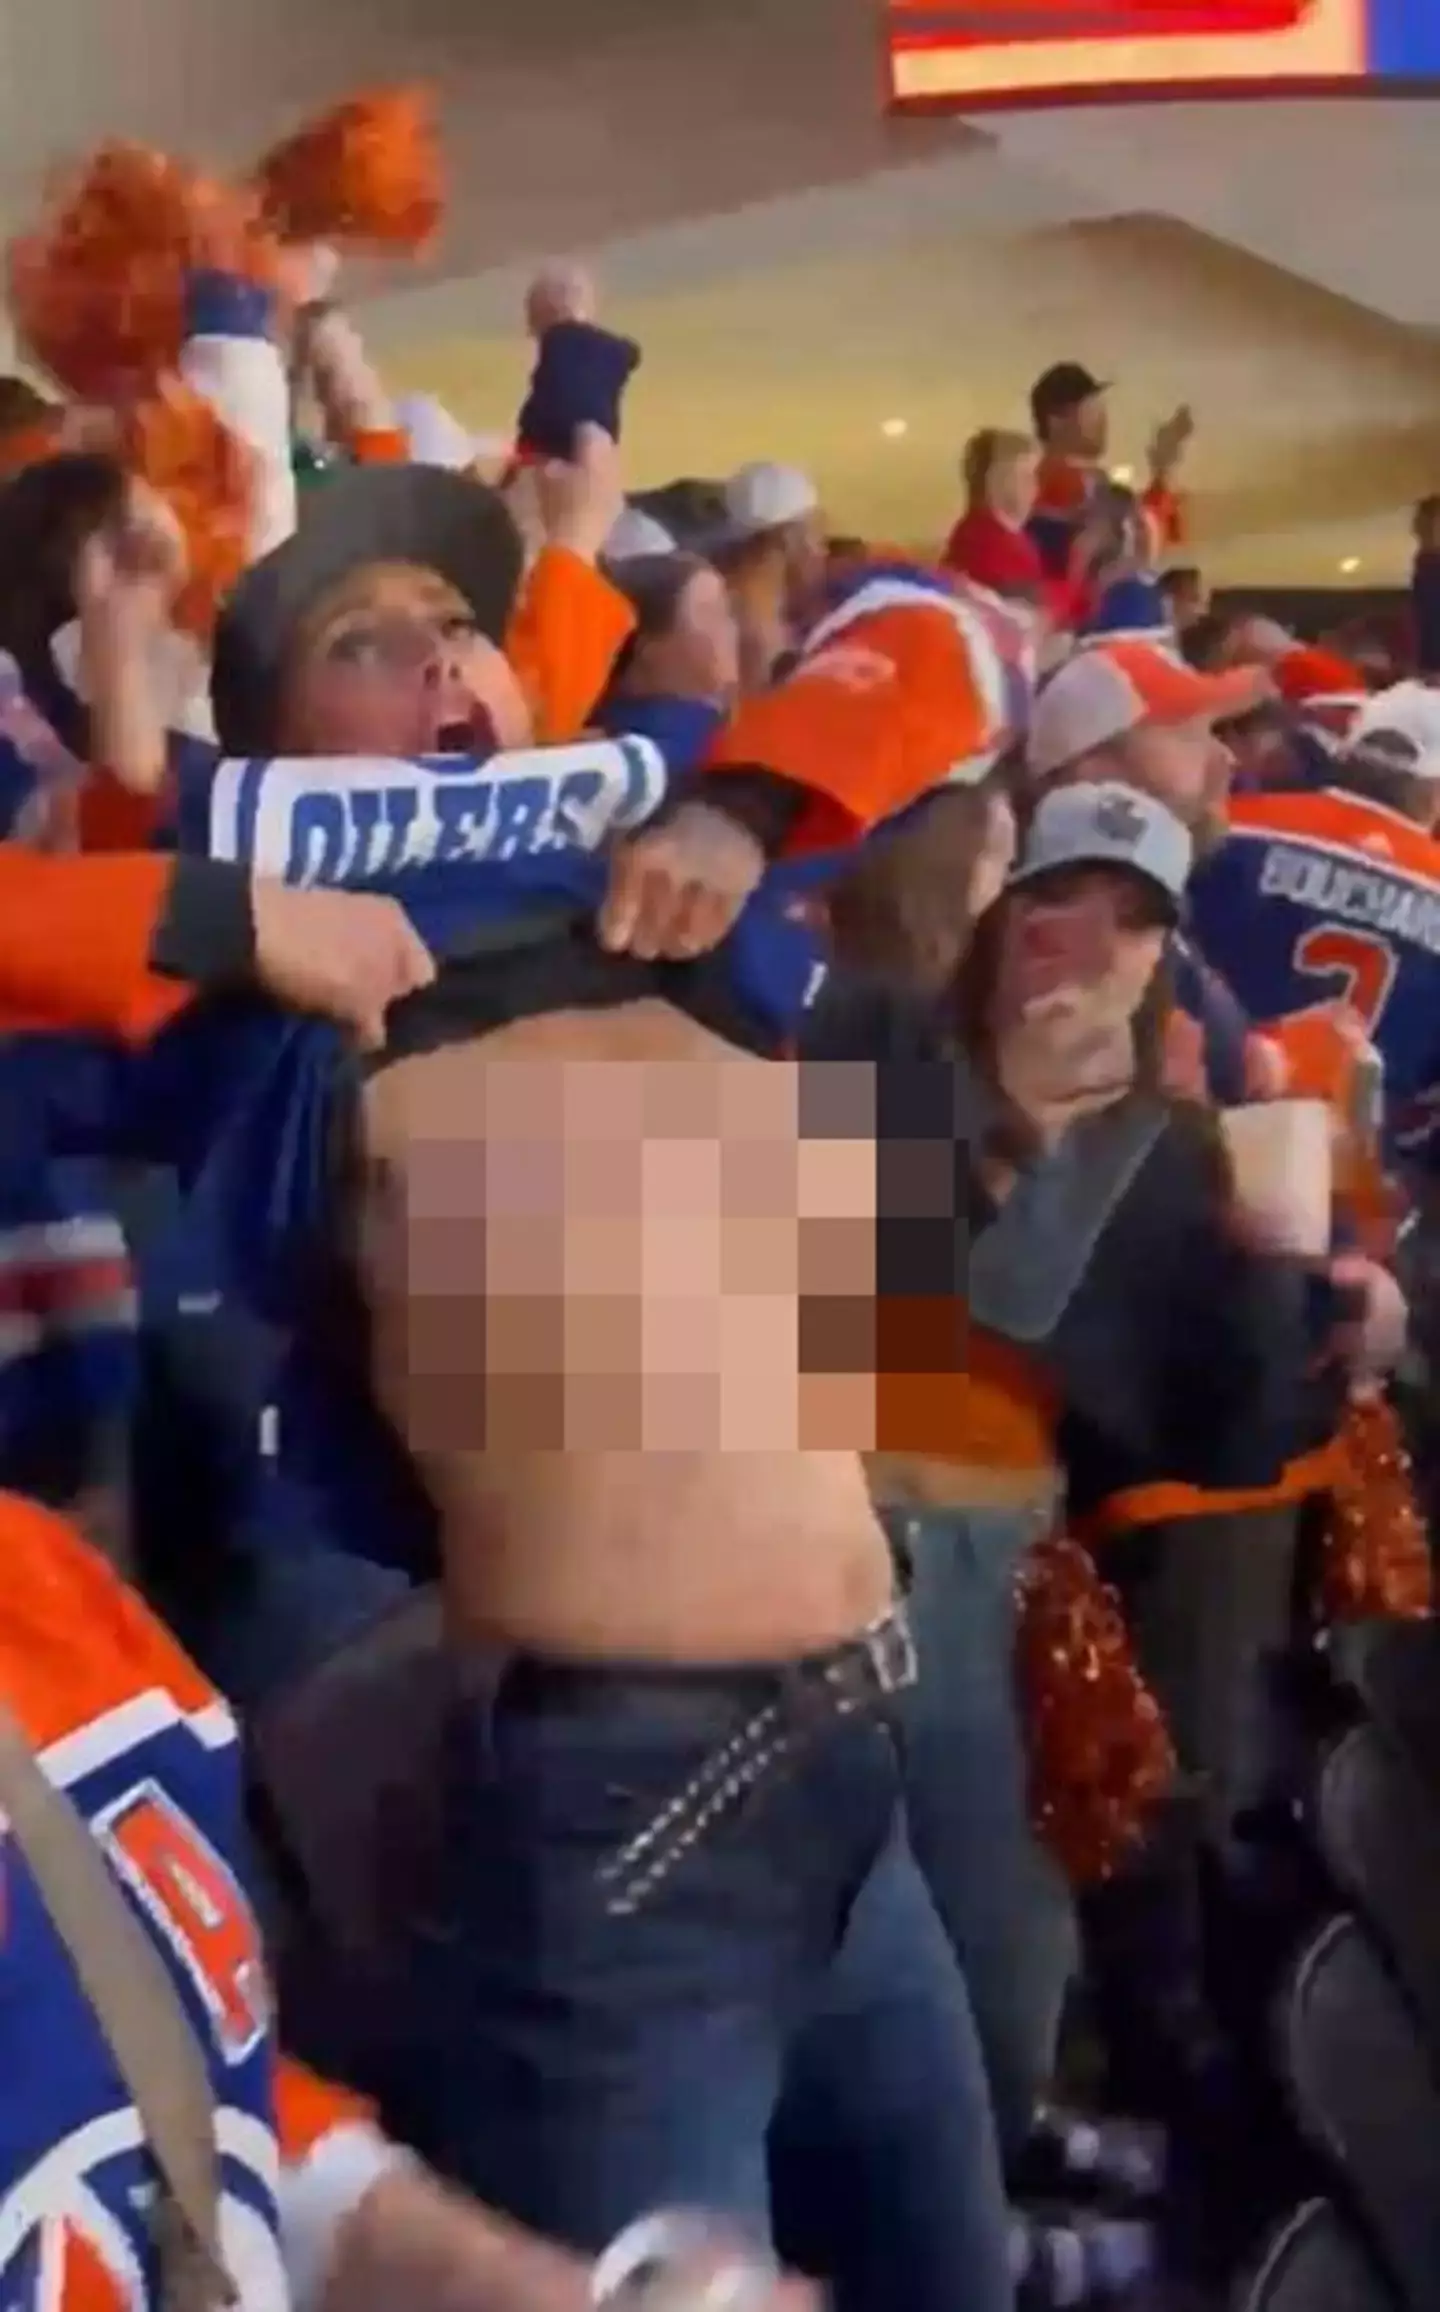 'Oilers girl' flashed her boobs to the crowd. (X/@Gerry39464526)